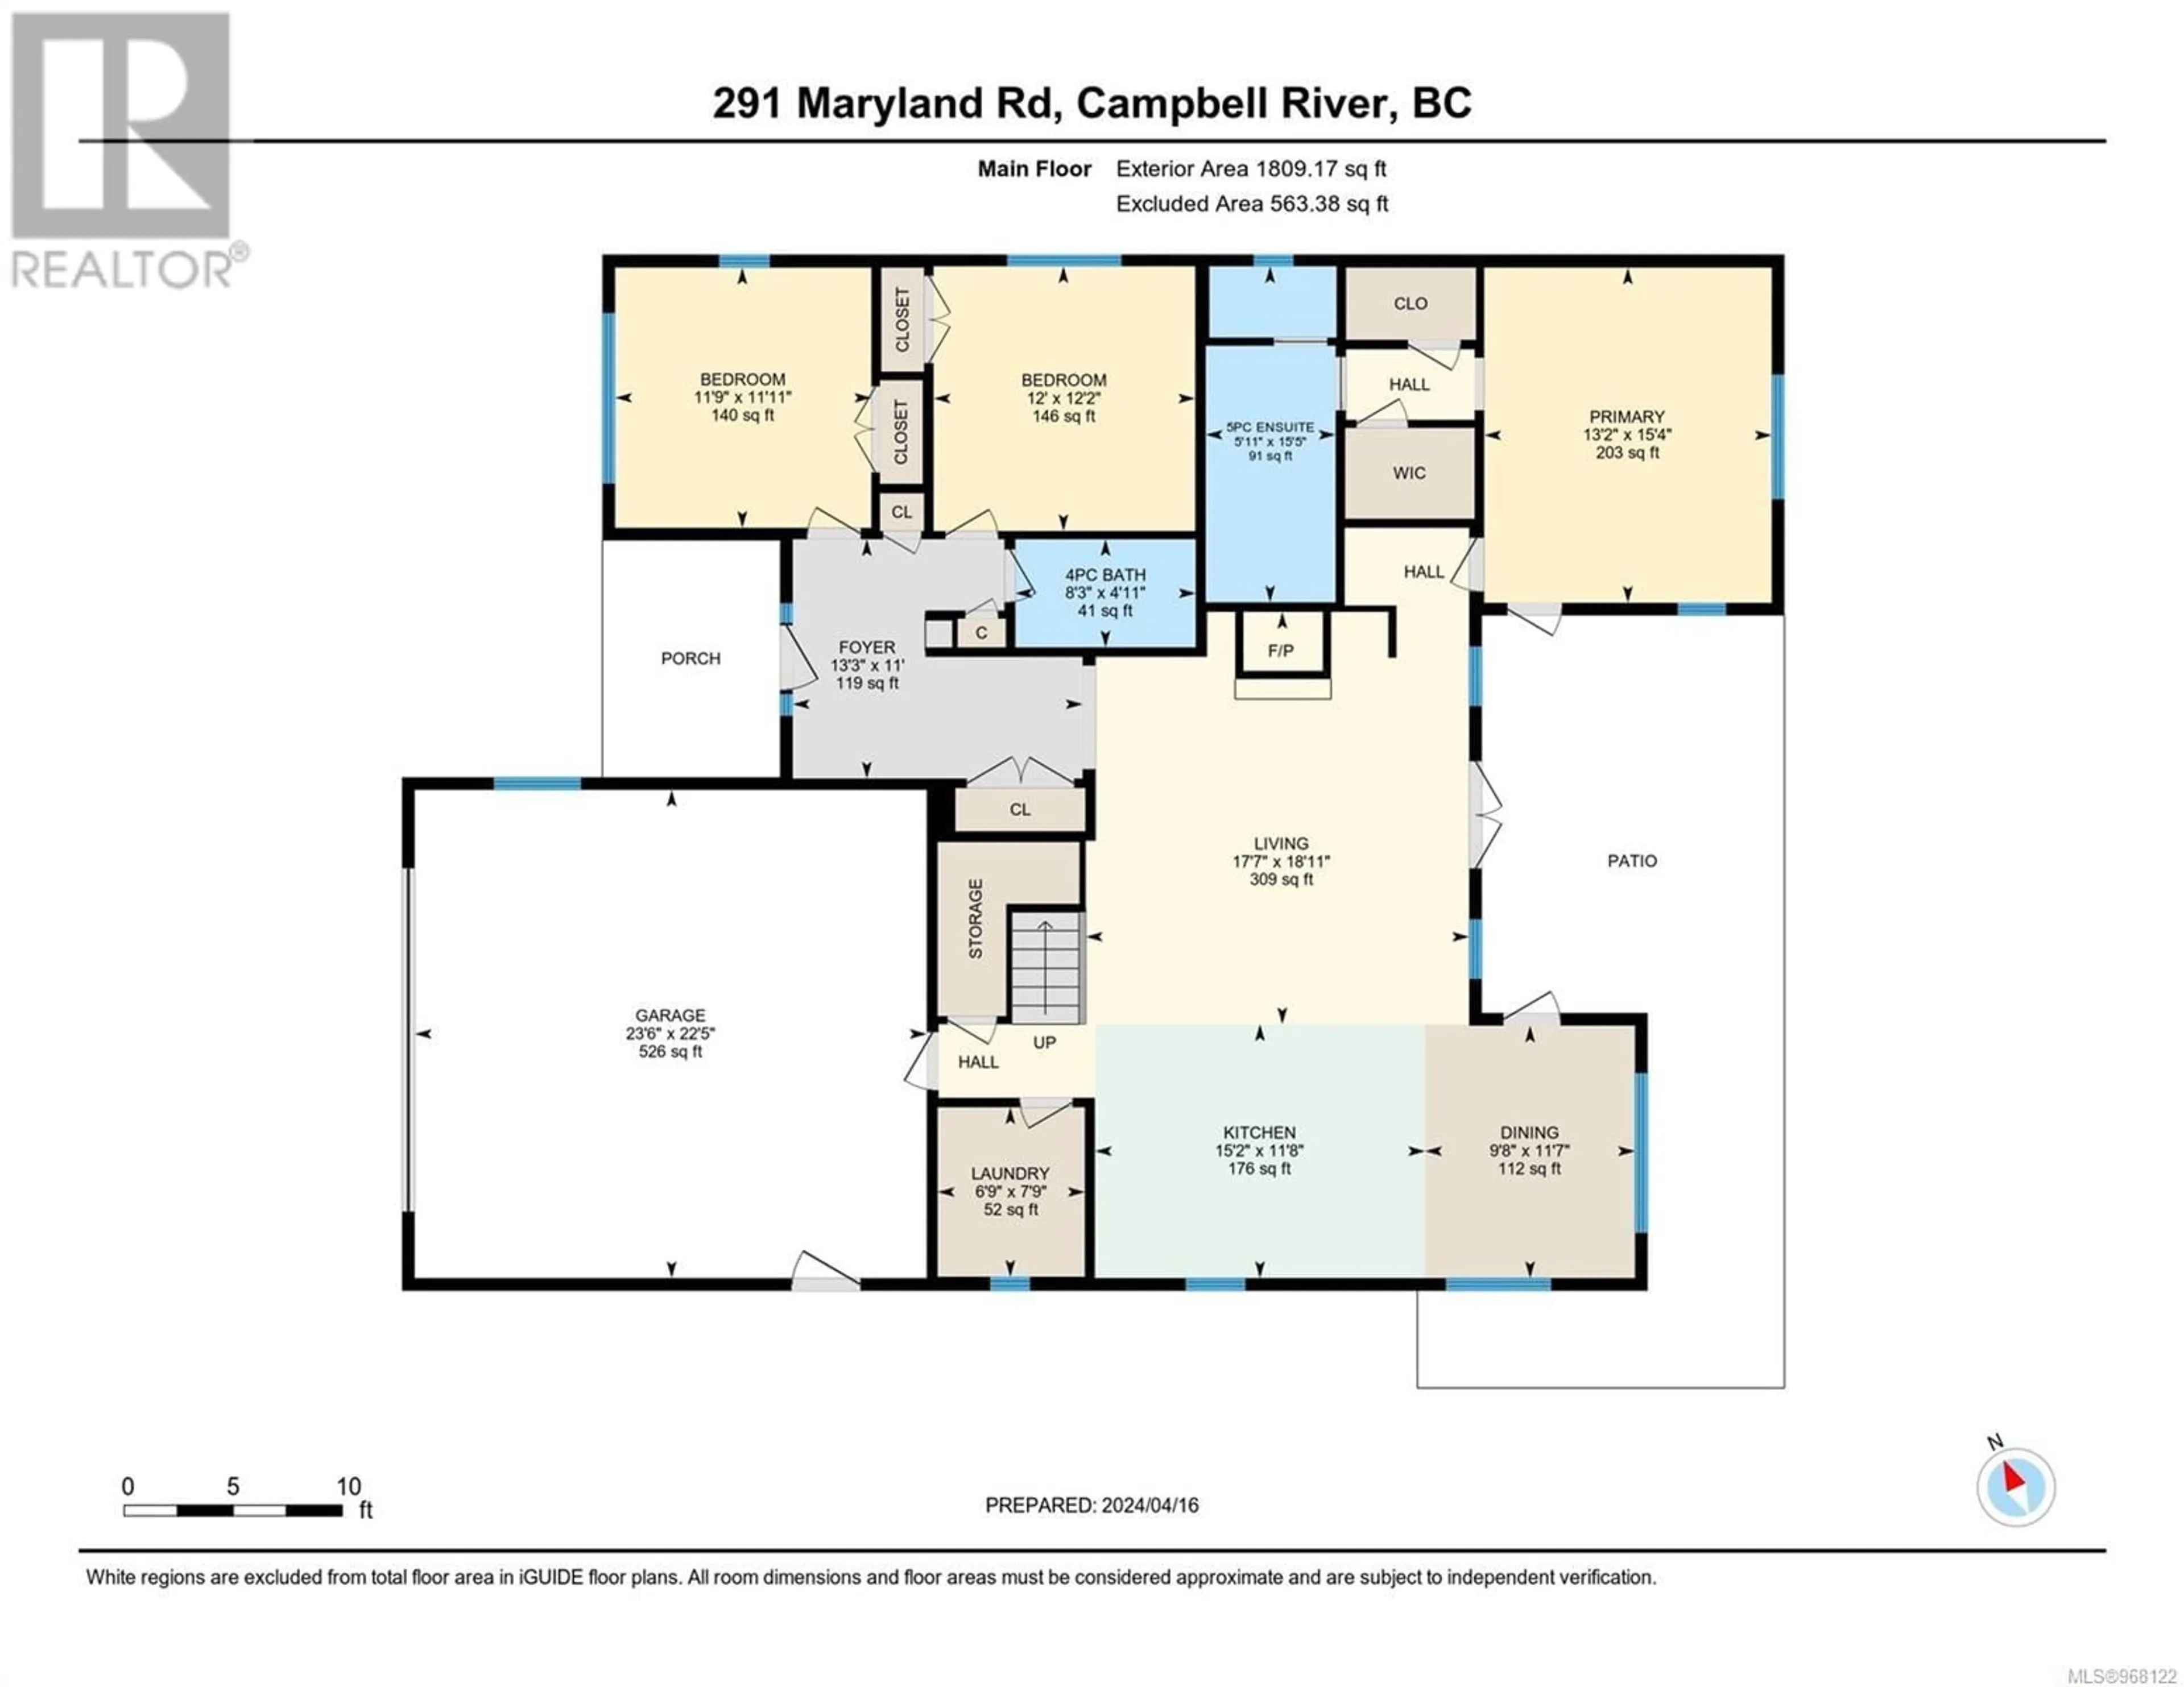 Floor plan for 291 Maryland Rd, Campbell River British Columbia V9W8H5